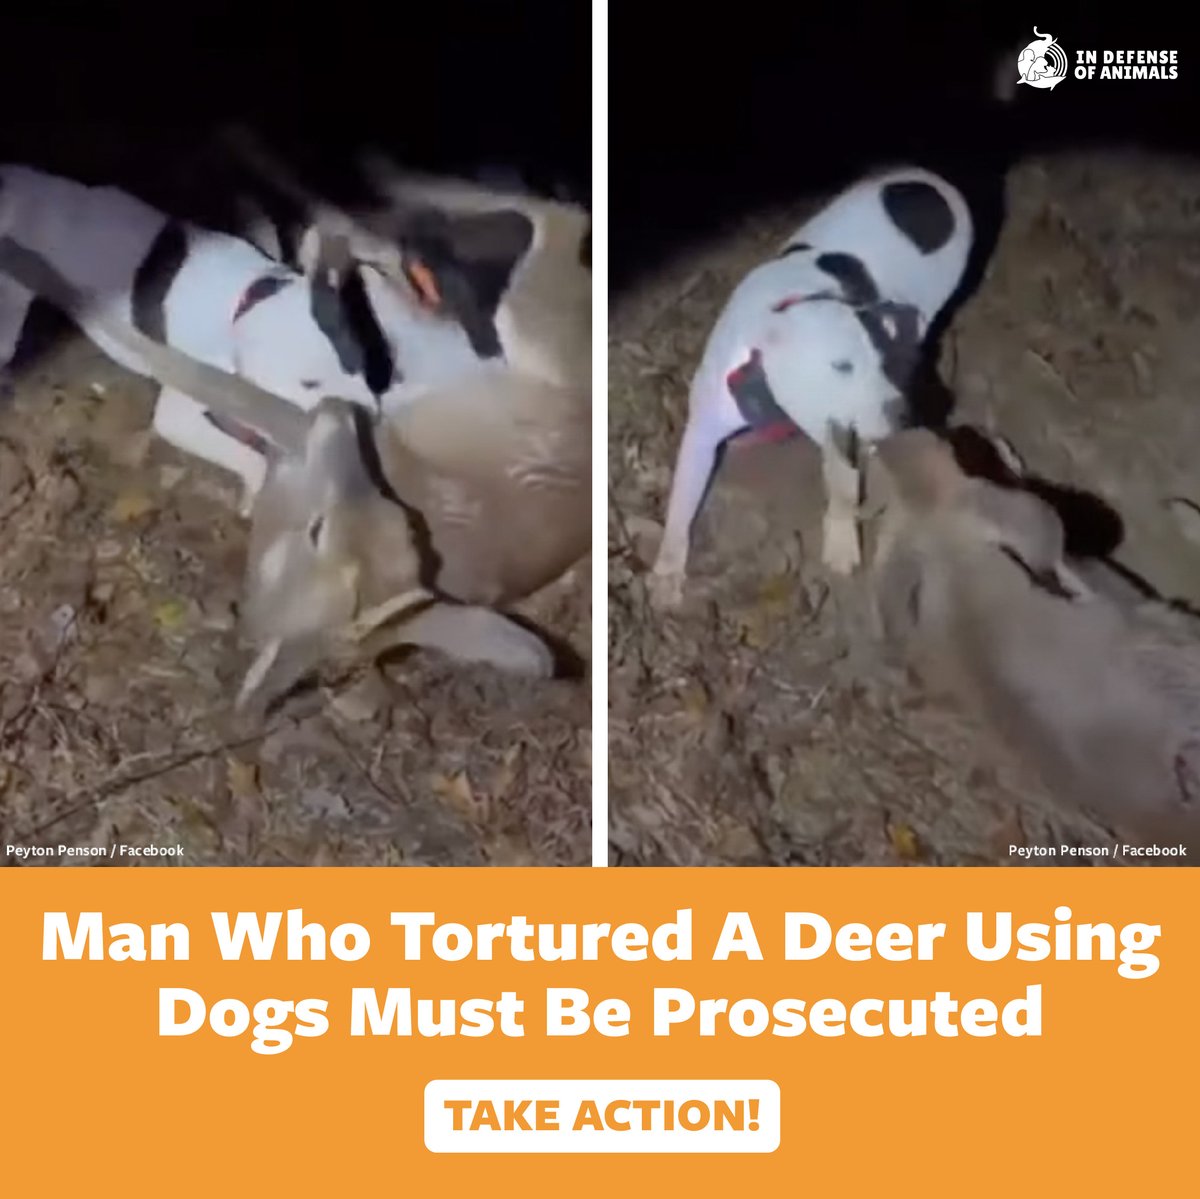 Demand justice for a downed deer who was attacked by a man’s dogs in Mississippi!
Take action: bit.ly/3y8mIQc
Pls RT and support our work: bit.ly/4buXCte
#Justice4Animals